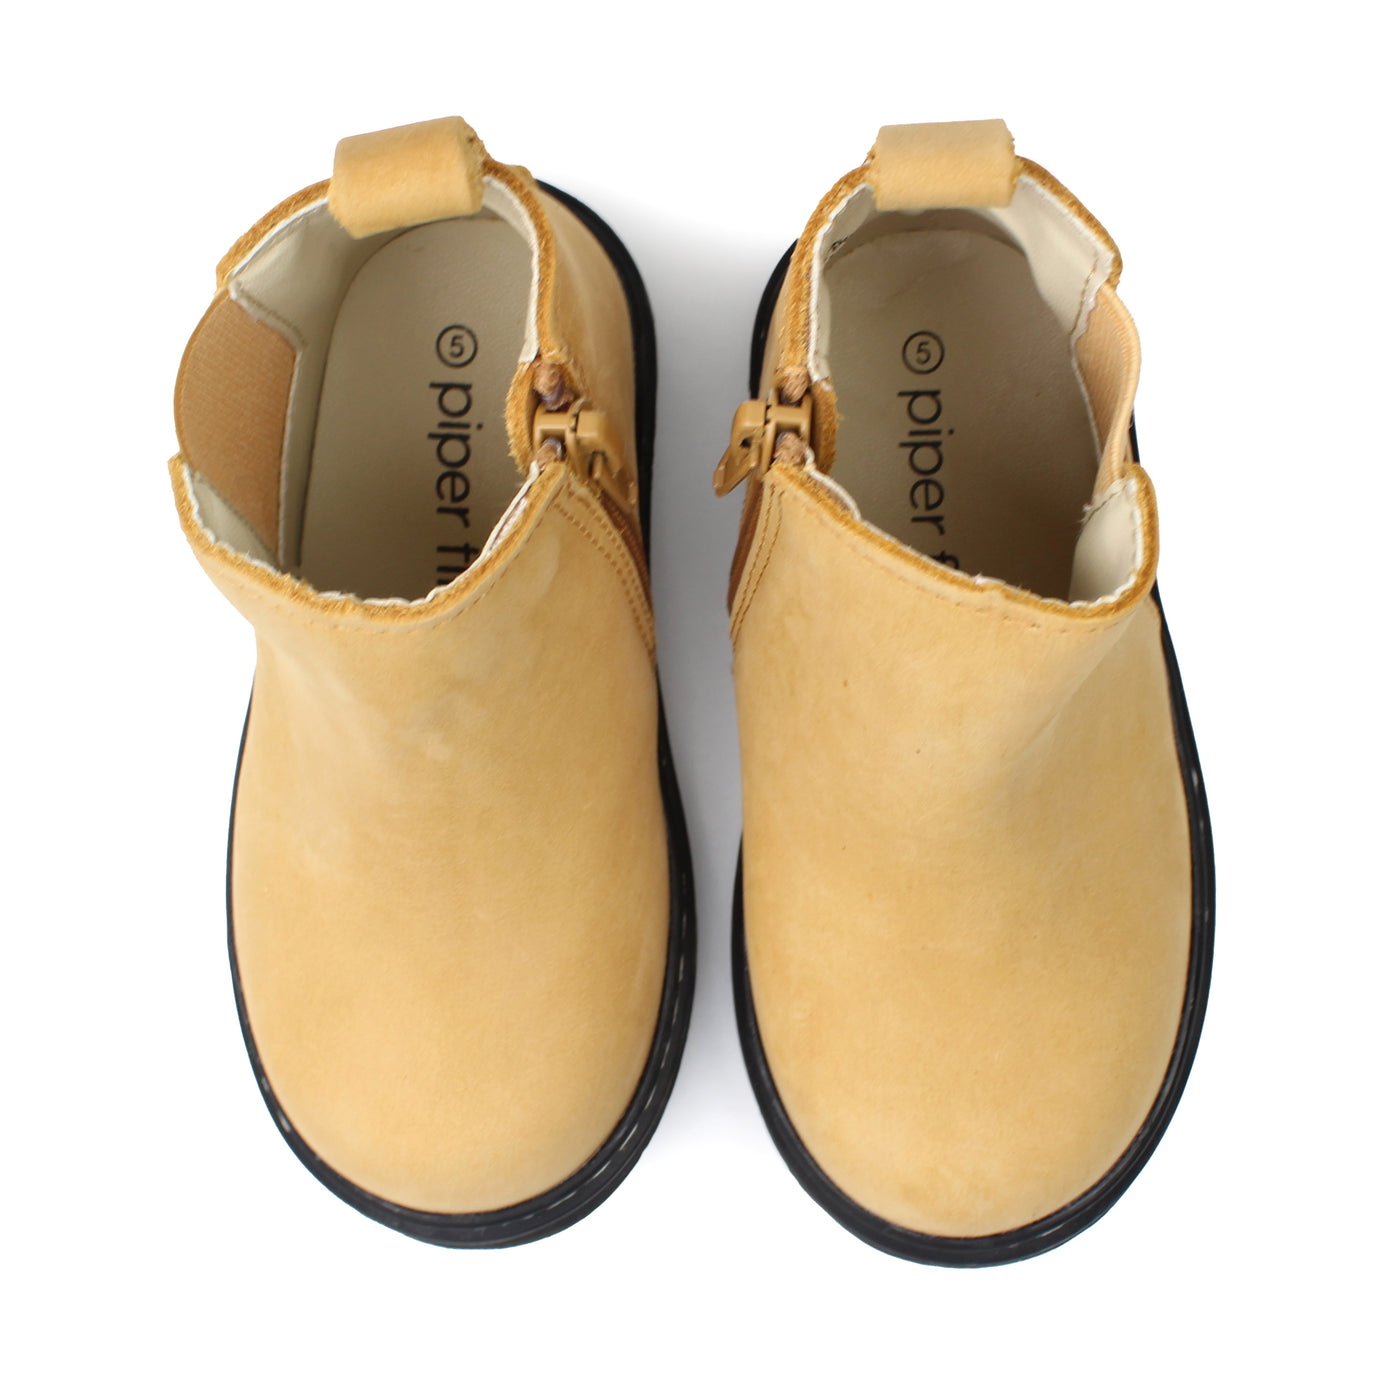 Natural - Chelsea Boot - Hard Sole